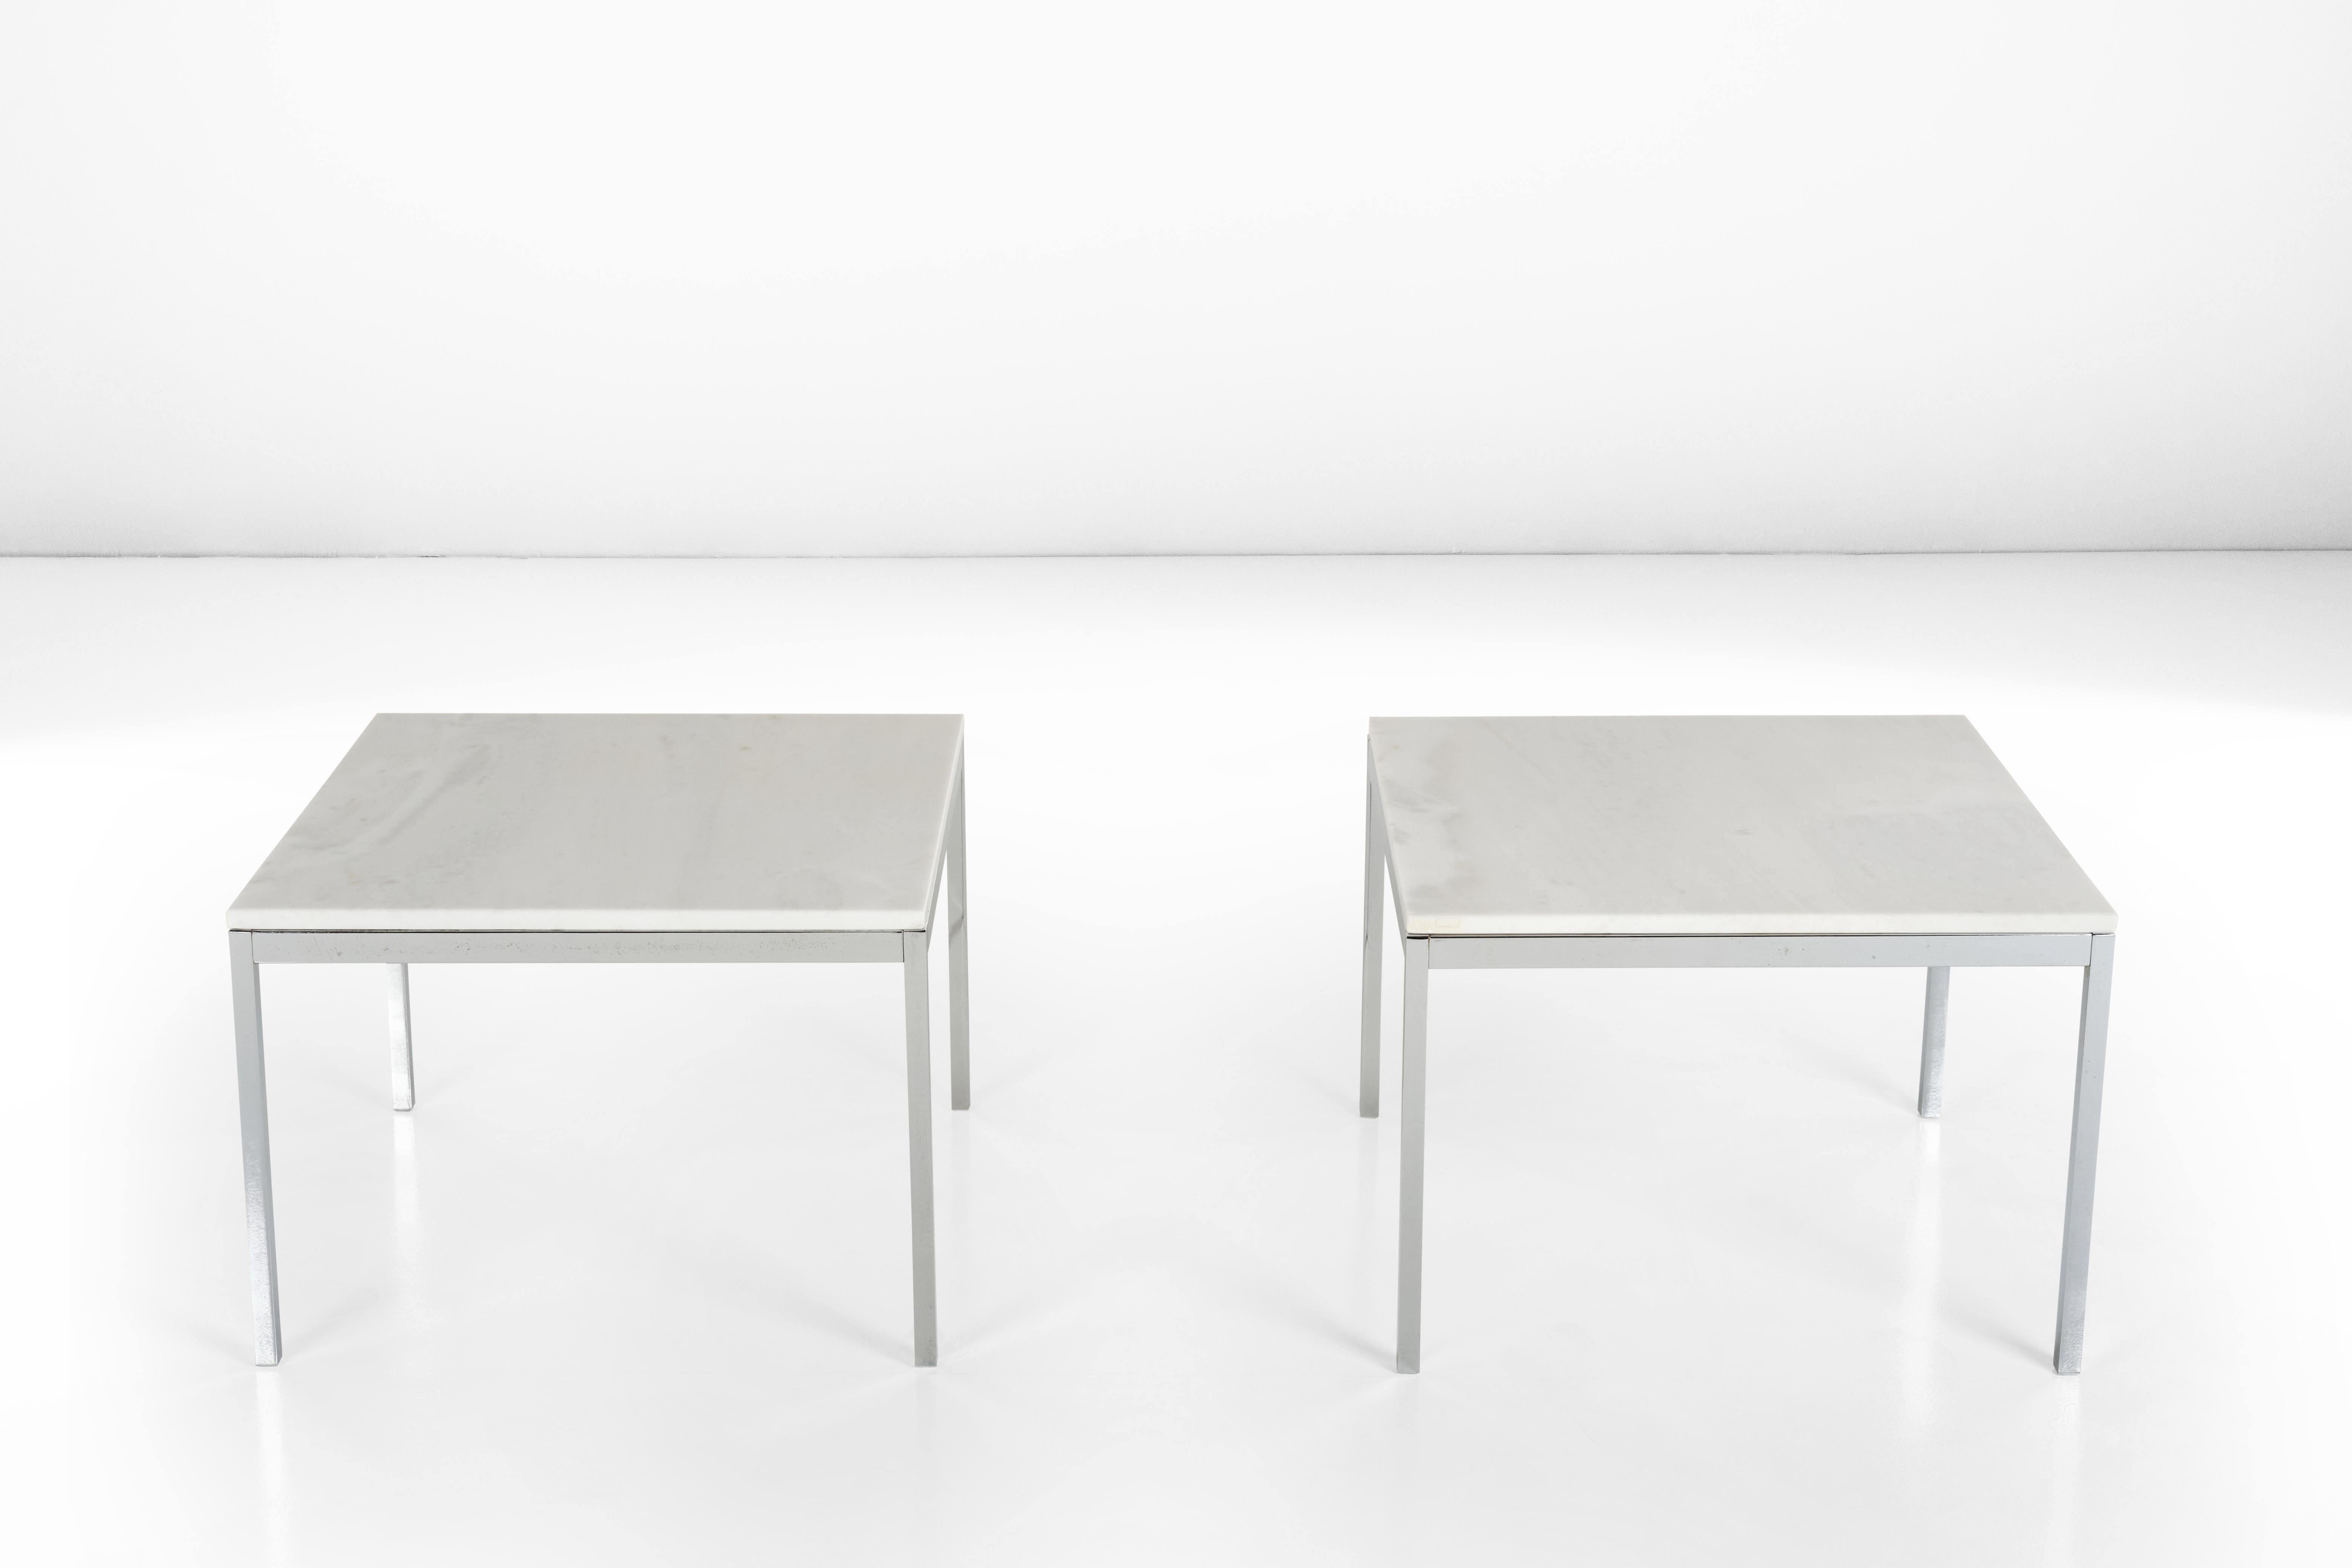 Steel Set of Two Metal and Mar Low Table by Florence Knoll, American Design, 1960s For Sale